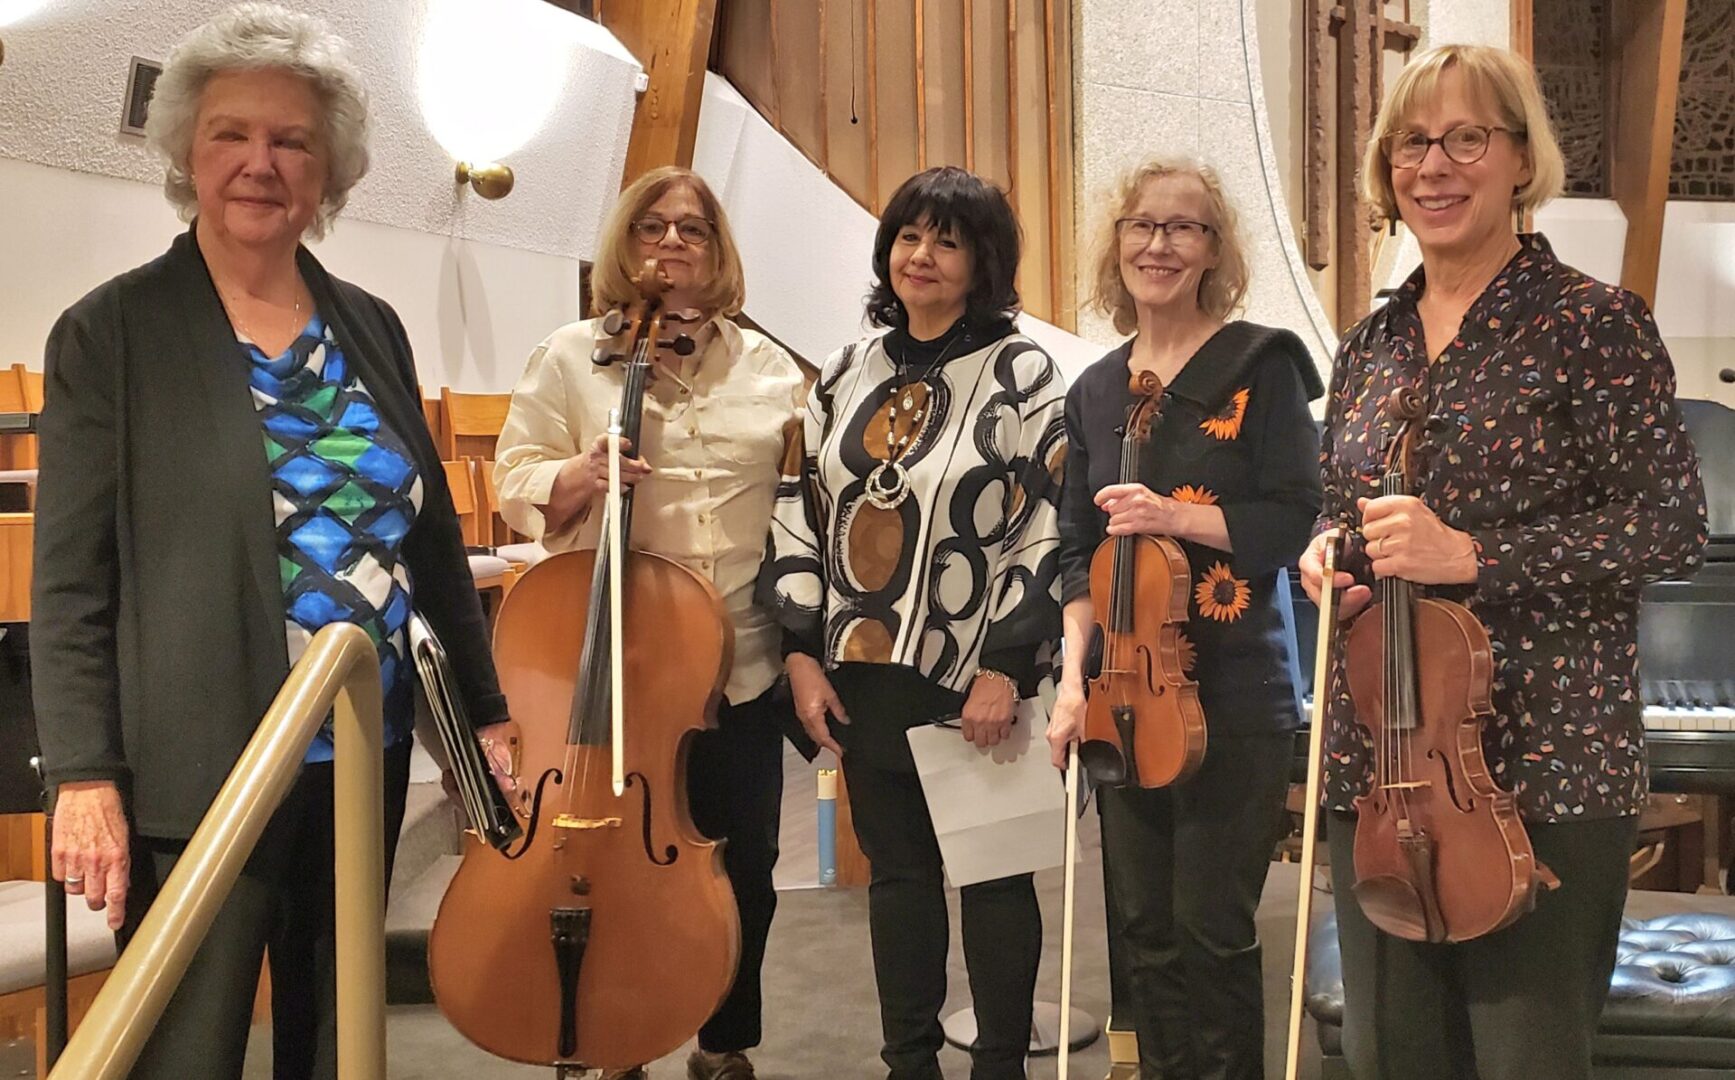 Group image of ladies with musical instruments